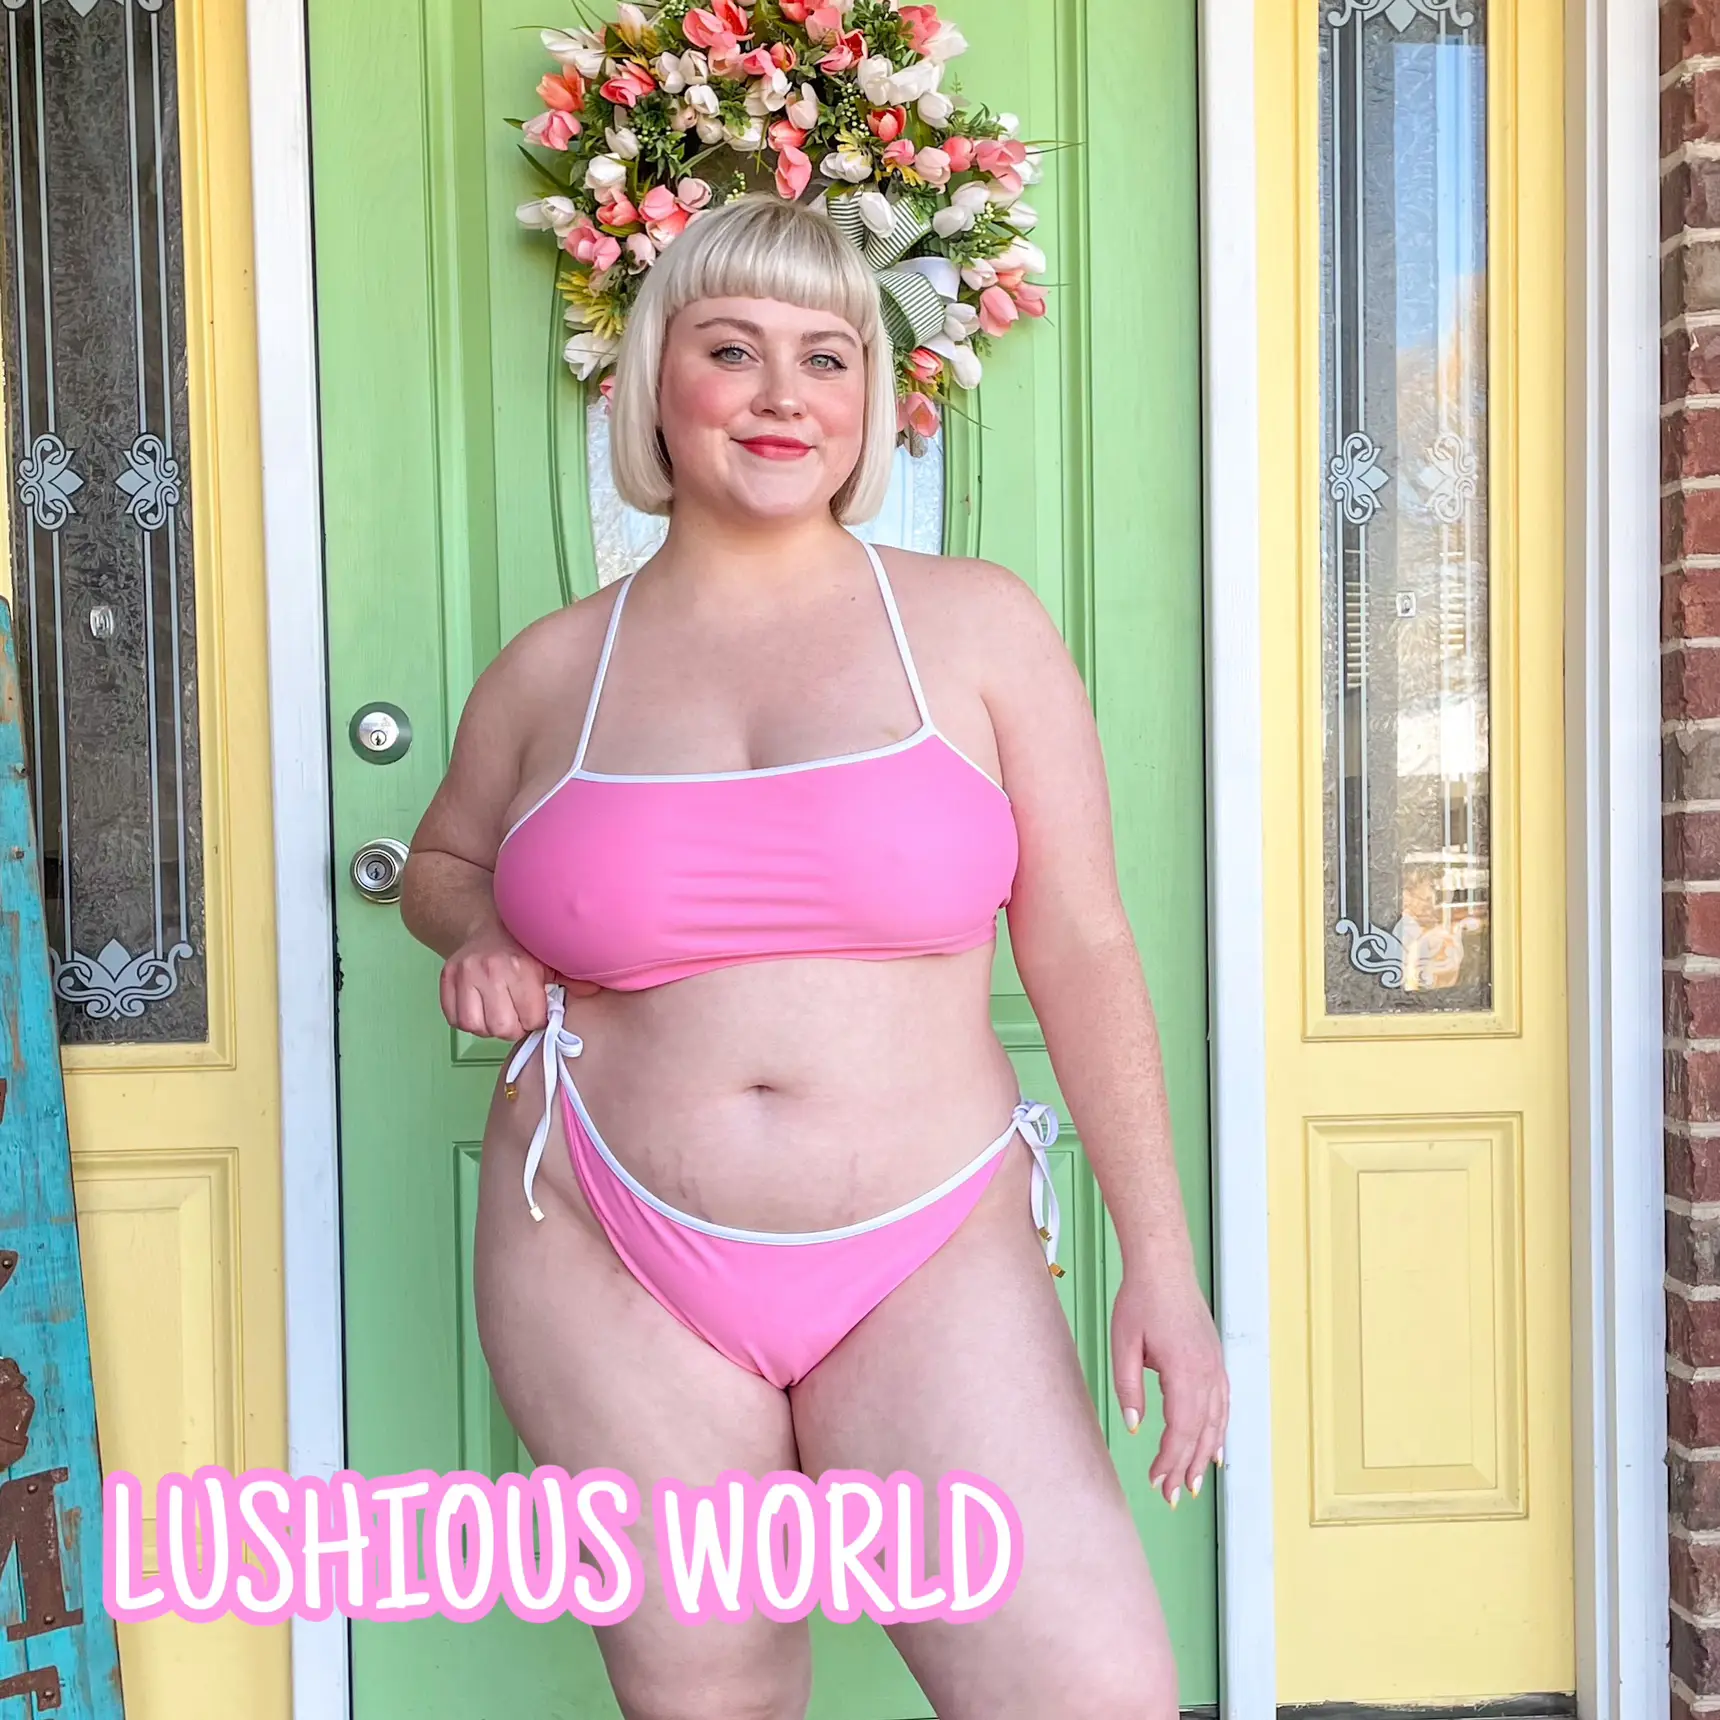 I'm plus-size with 38I boobs & did a Good American swim haul - the